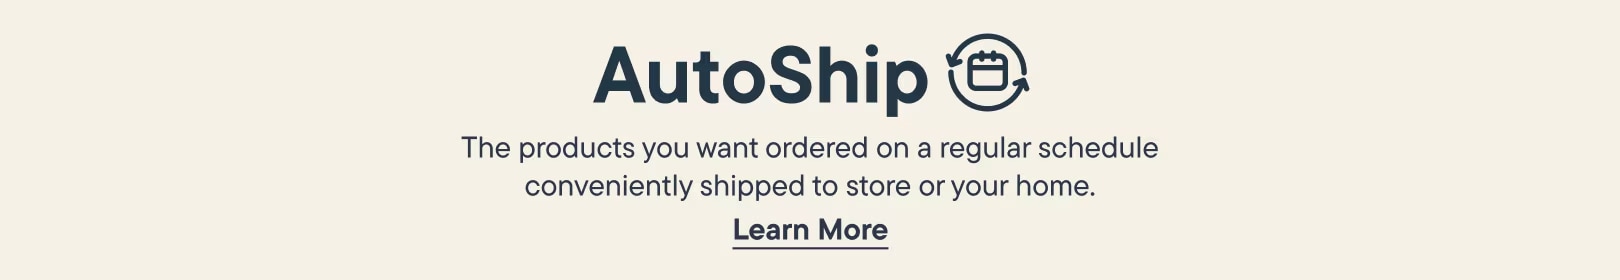 AutoShip - Learn More